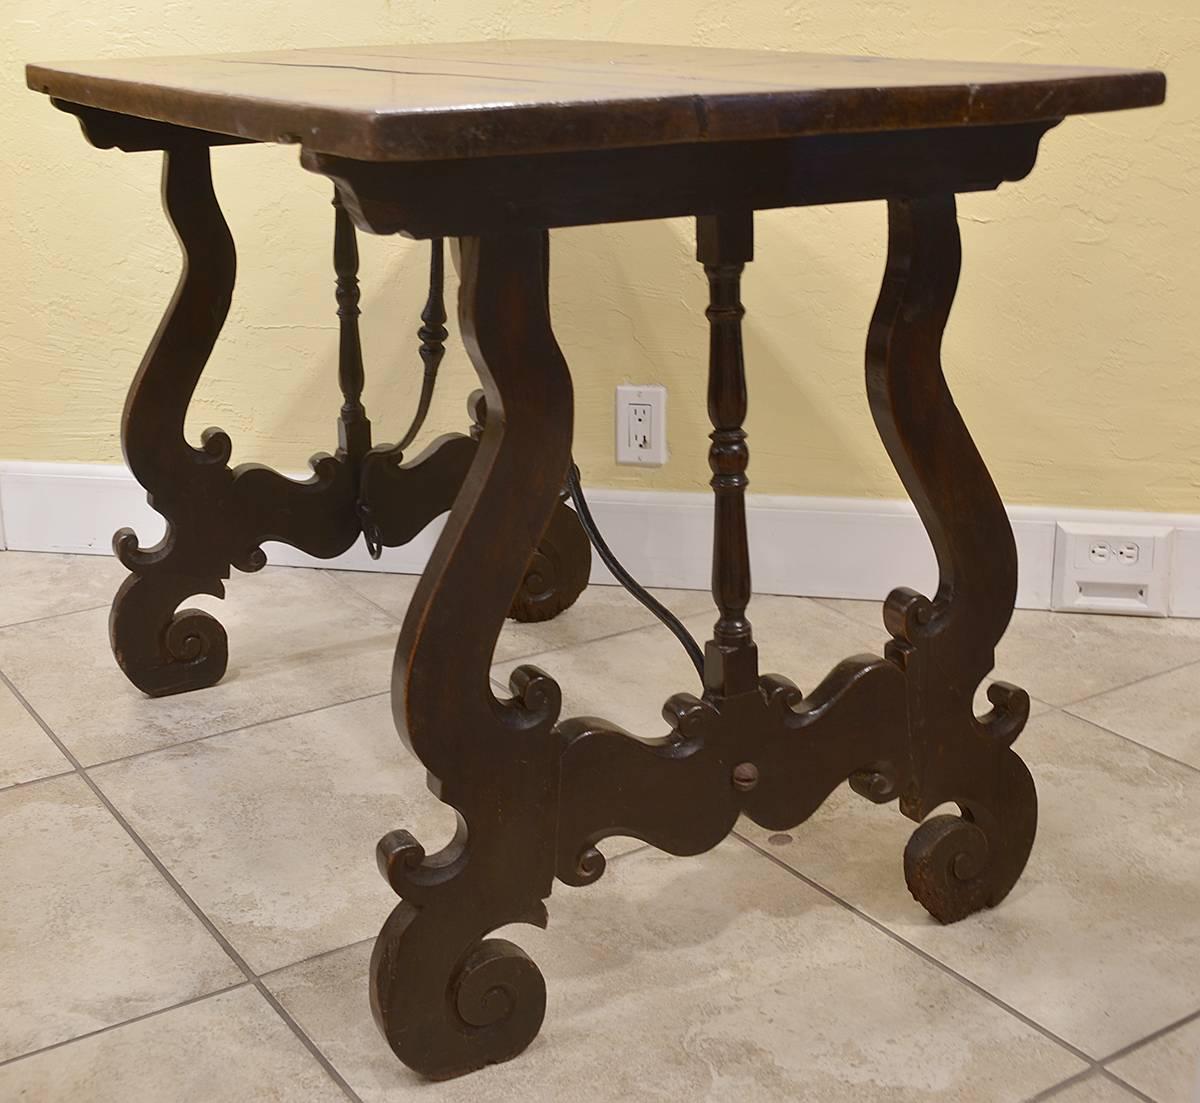 18th century Spanish walnut table with scrolled iron supports. Good condition based on age.